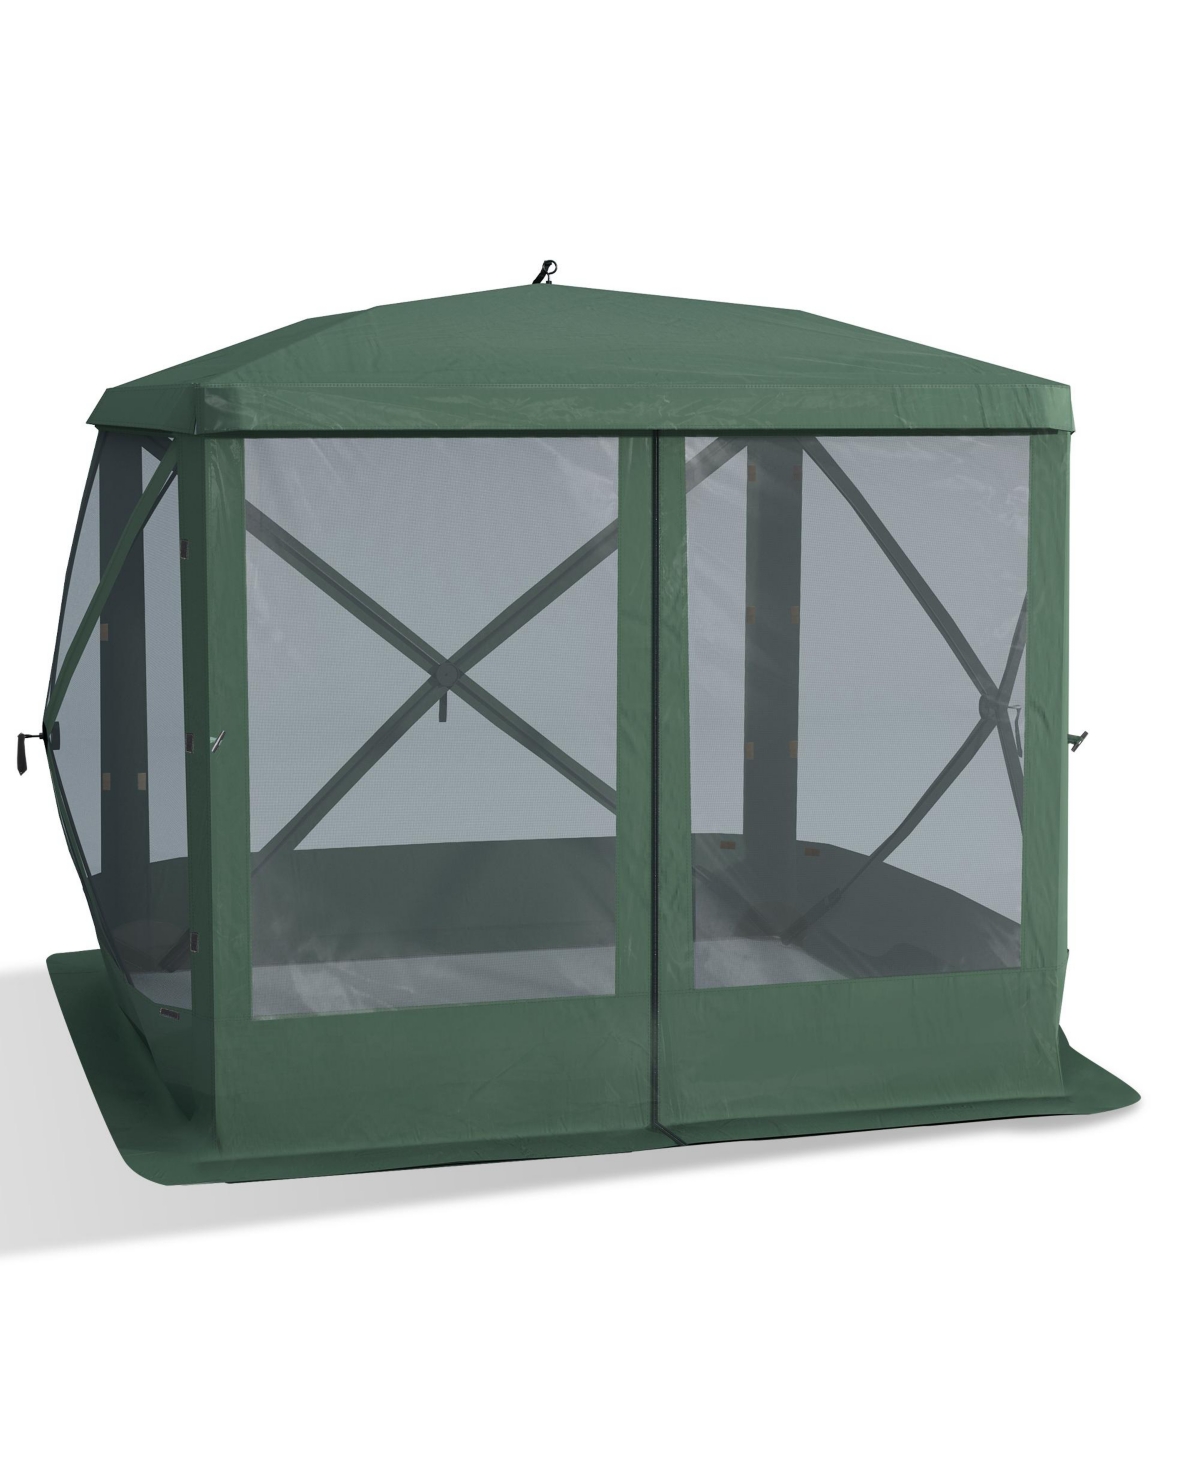 Pop Up Camping Canopy Gazebo Screen Shelter Tent with Single Person Easy Set-Up, Ventilating Mesh, Portable Carry Bag for Outdoor Camping Par